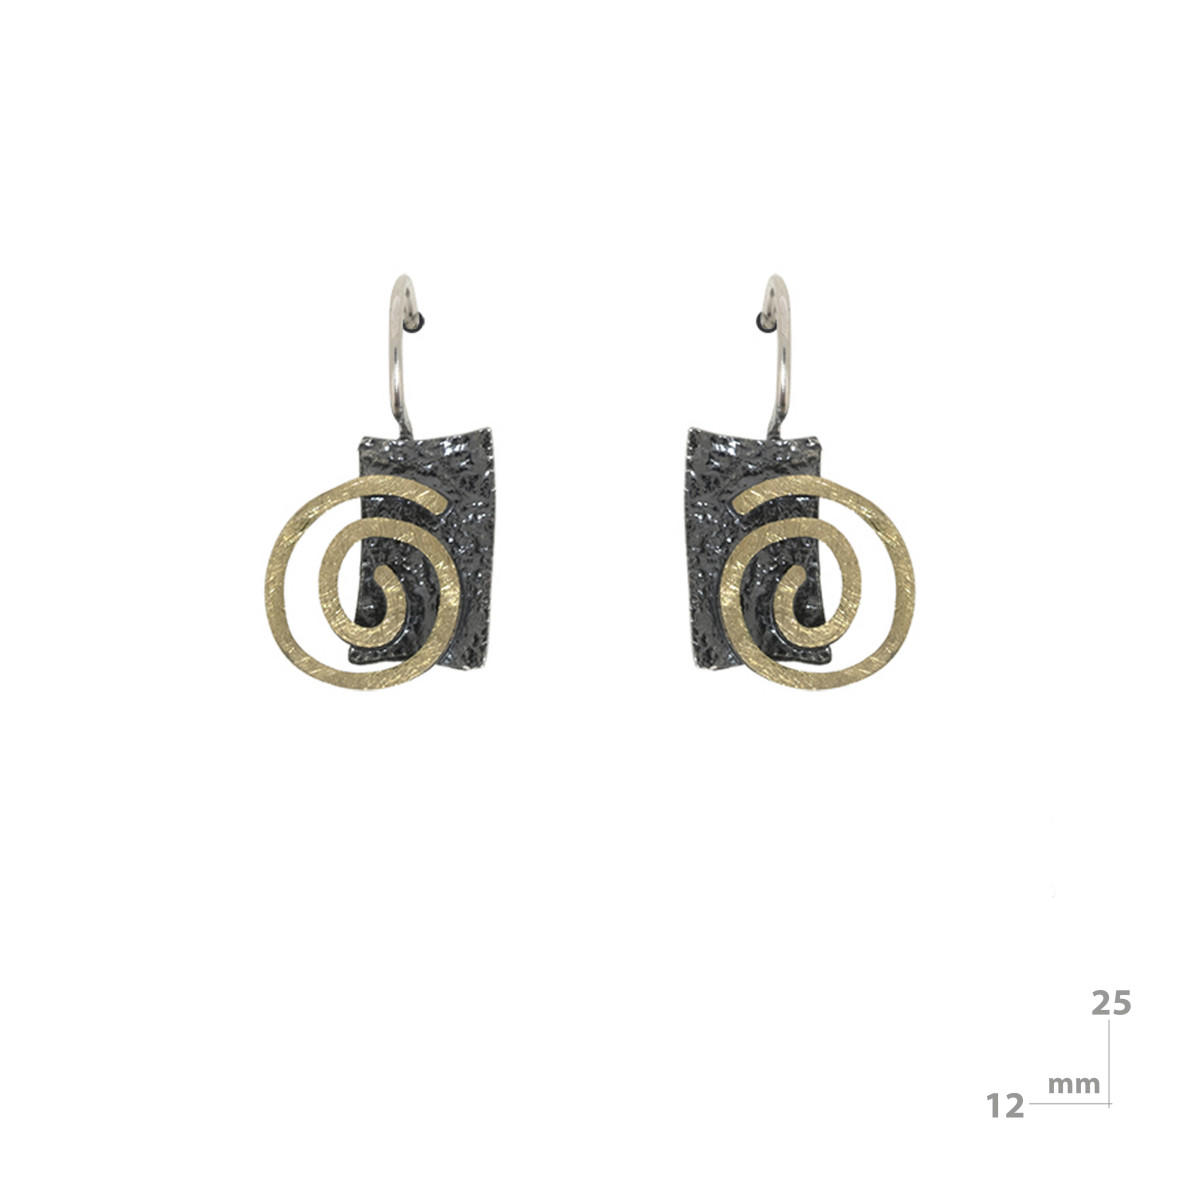 Earrings made of silver and 18k gold